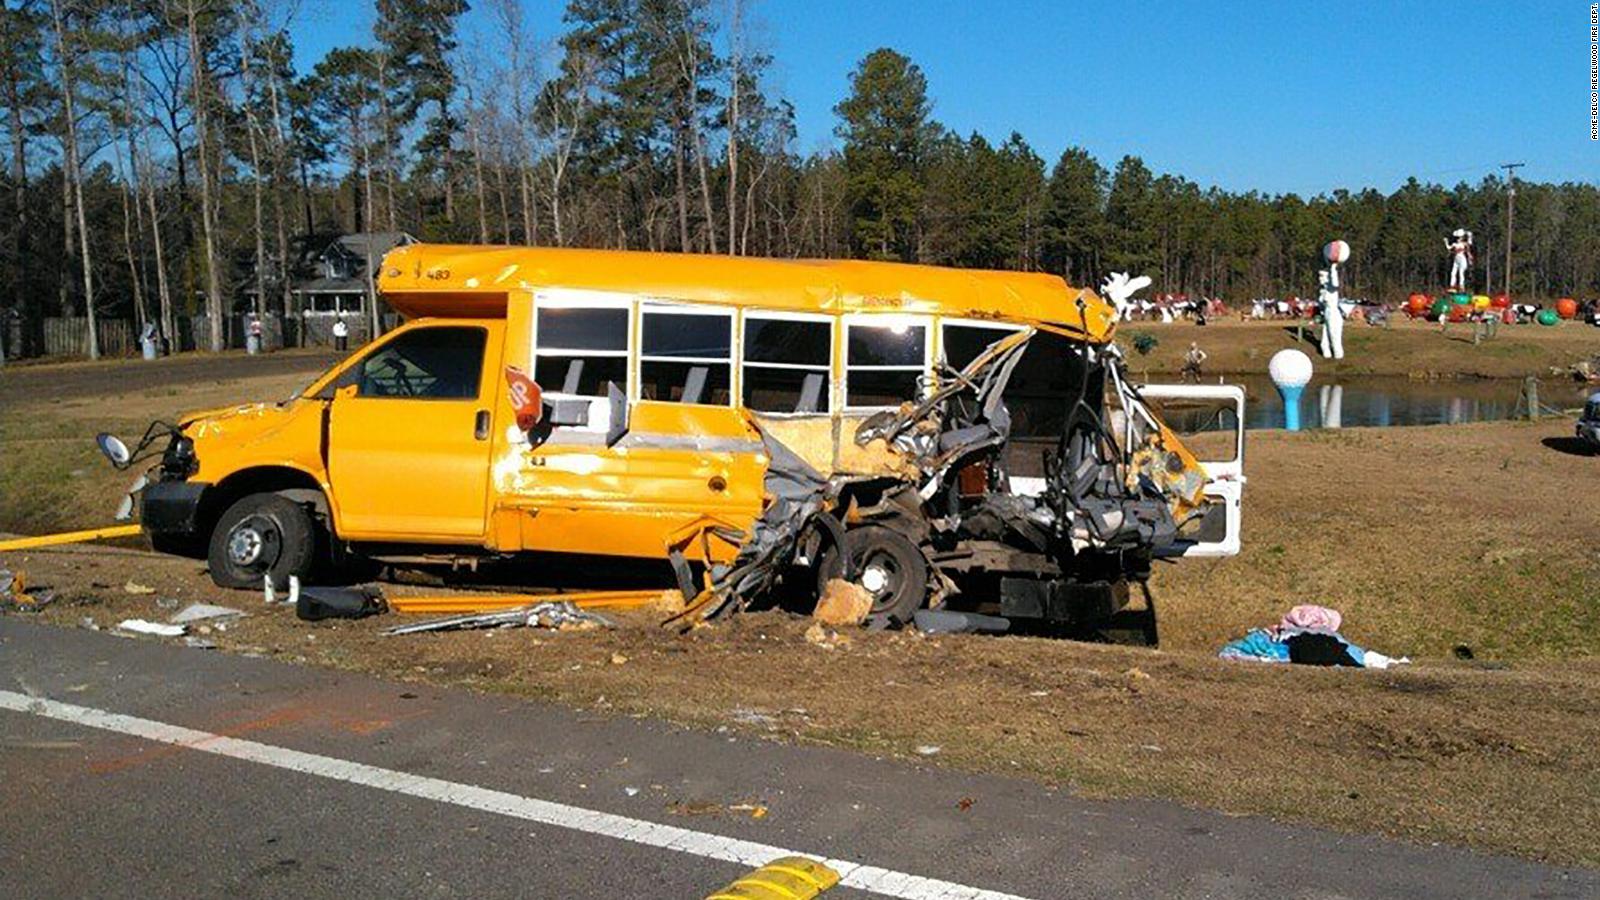 Ten injured, two seriously, after 18wheeler crashes into school bus in